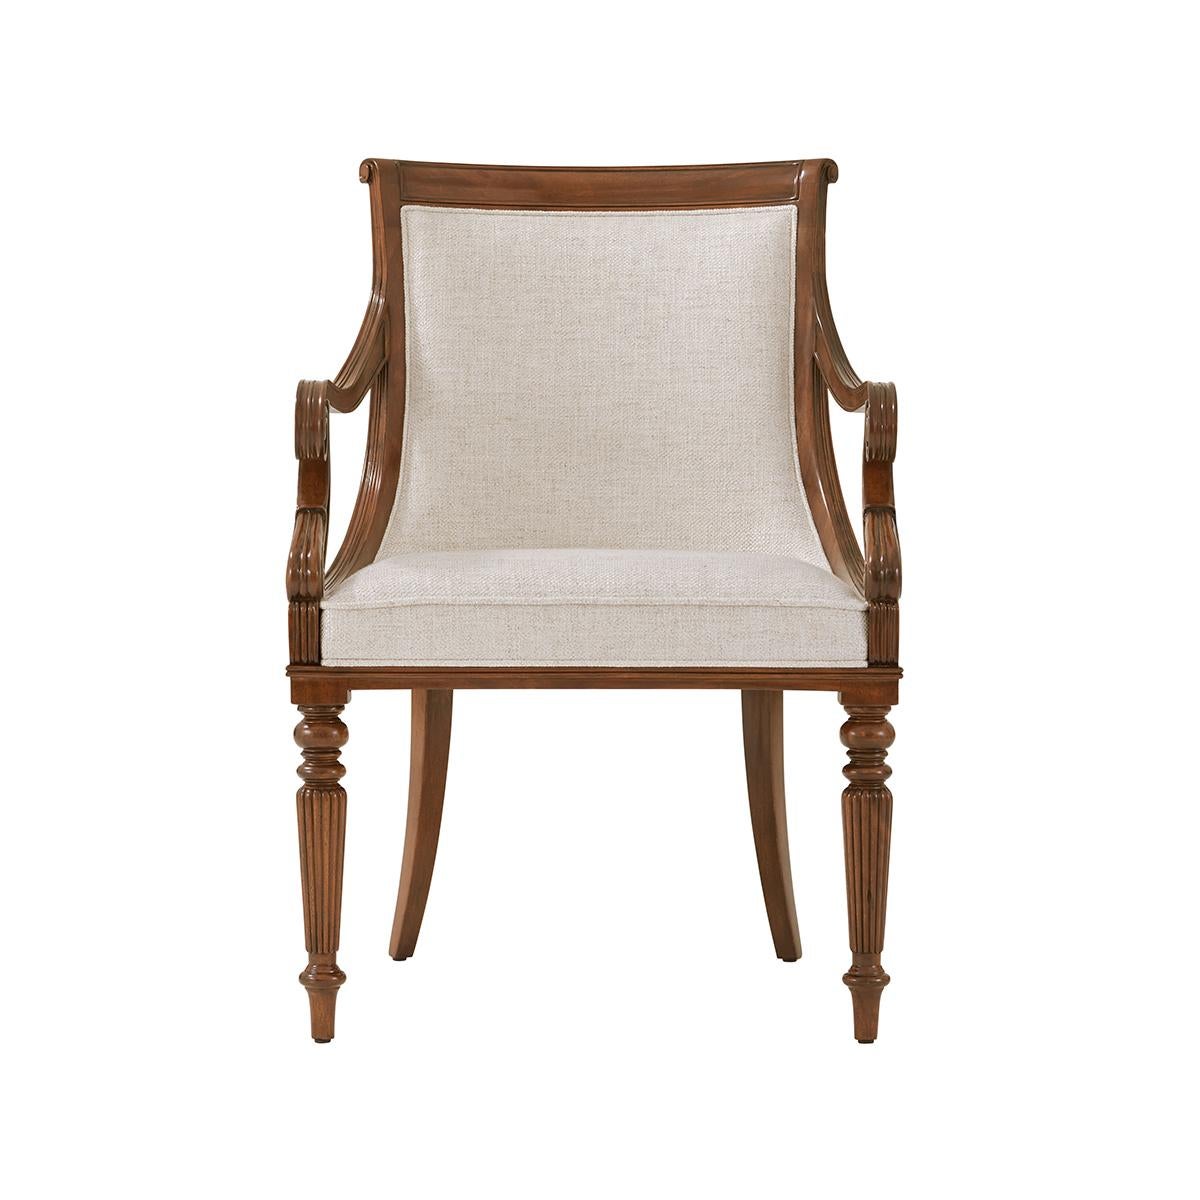 Carved mahogany scoop back dining armchairs with a paneled and upholstered backrest, beautifully carved scroll arms on turned and reeded legs.

Dimensions: 24.5